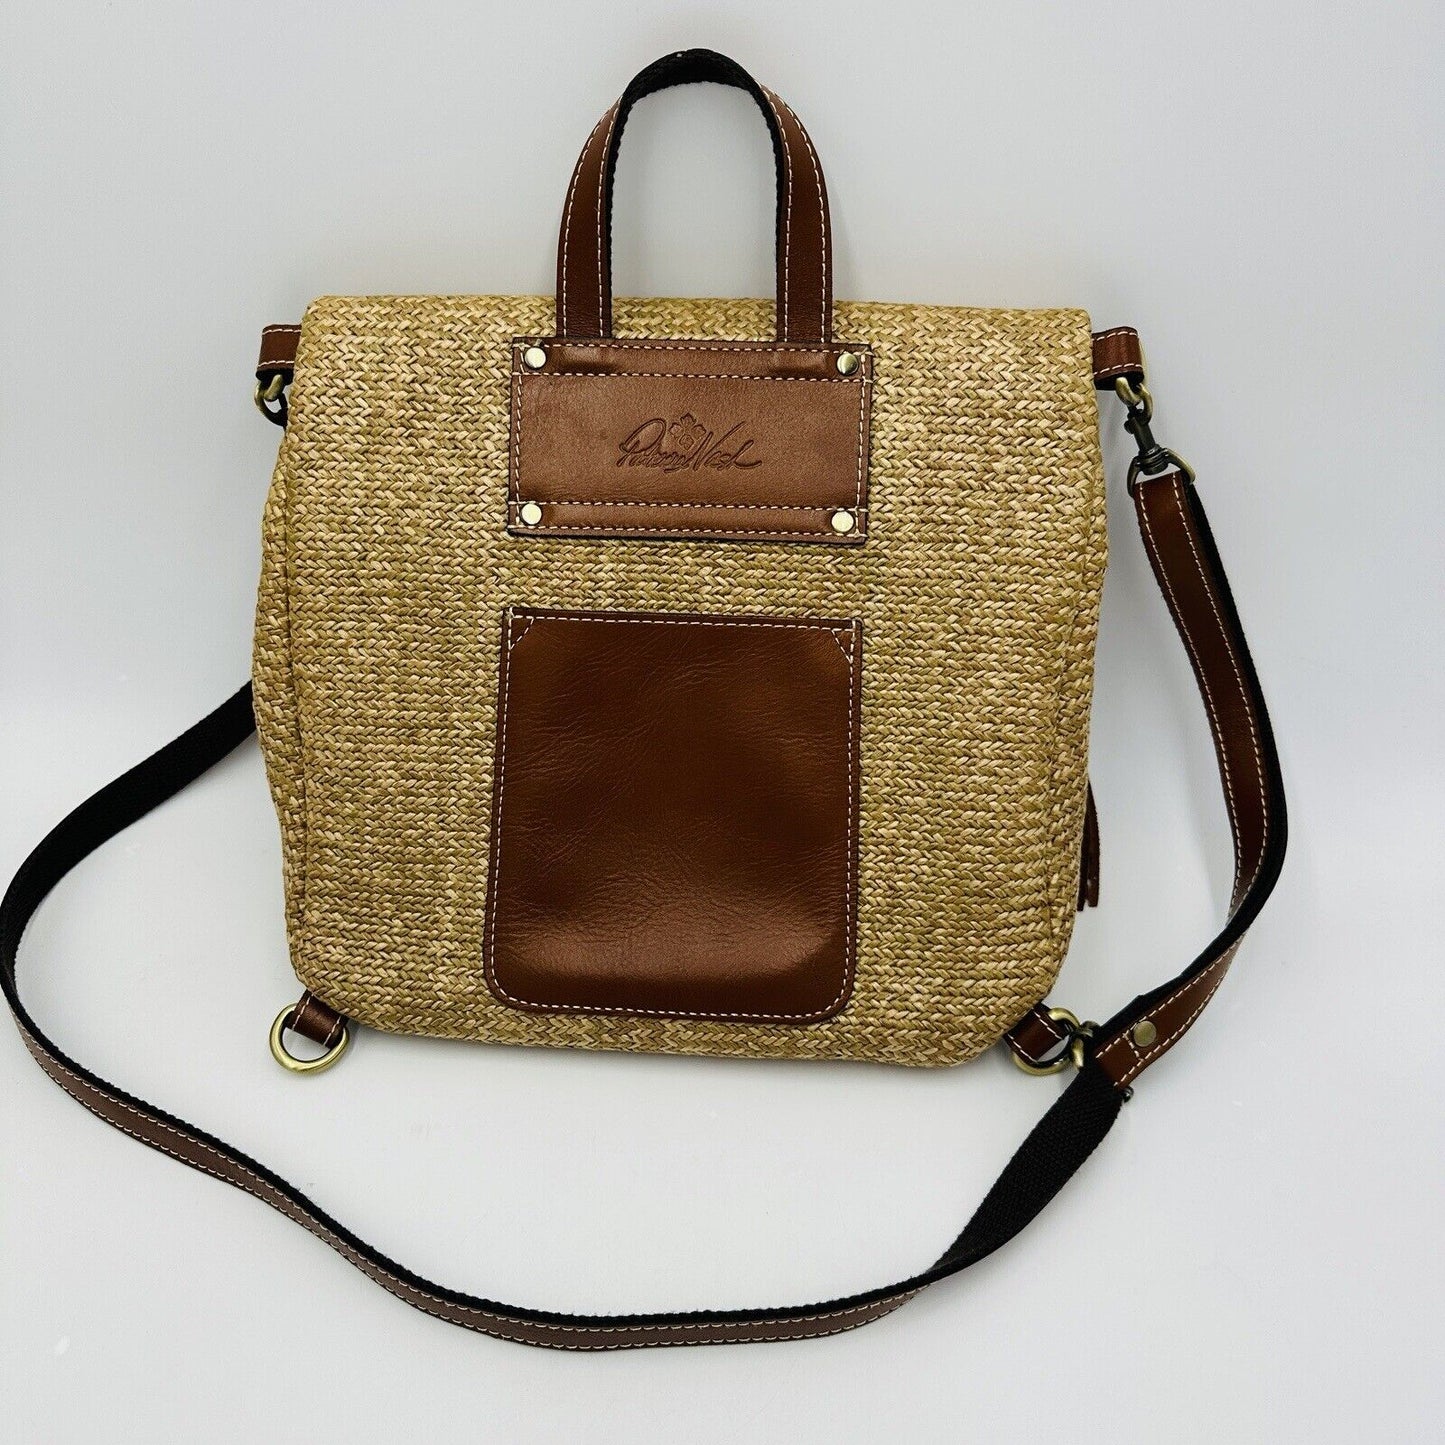 Patricia Nash Women's Purse Luzille Backpack Natural Woven Bag Handle Textured